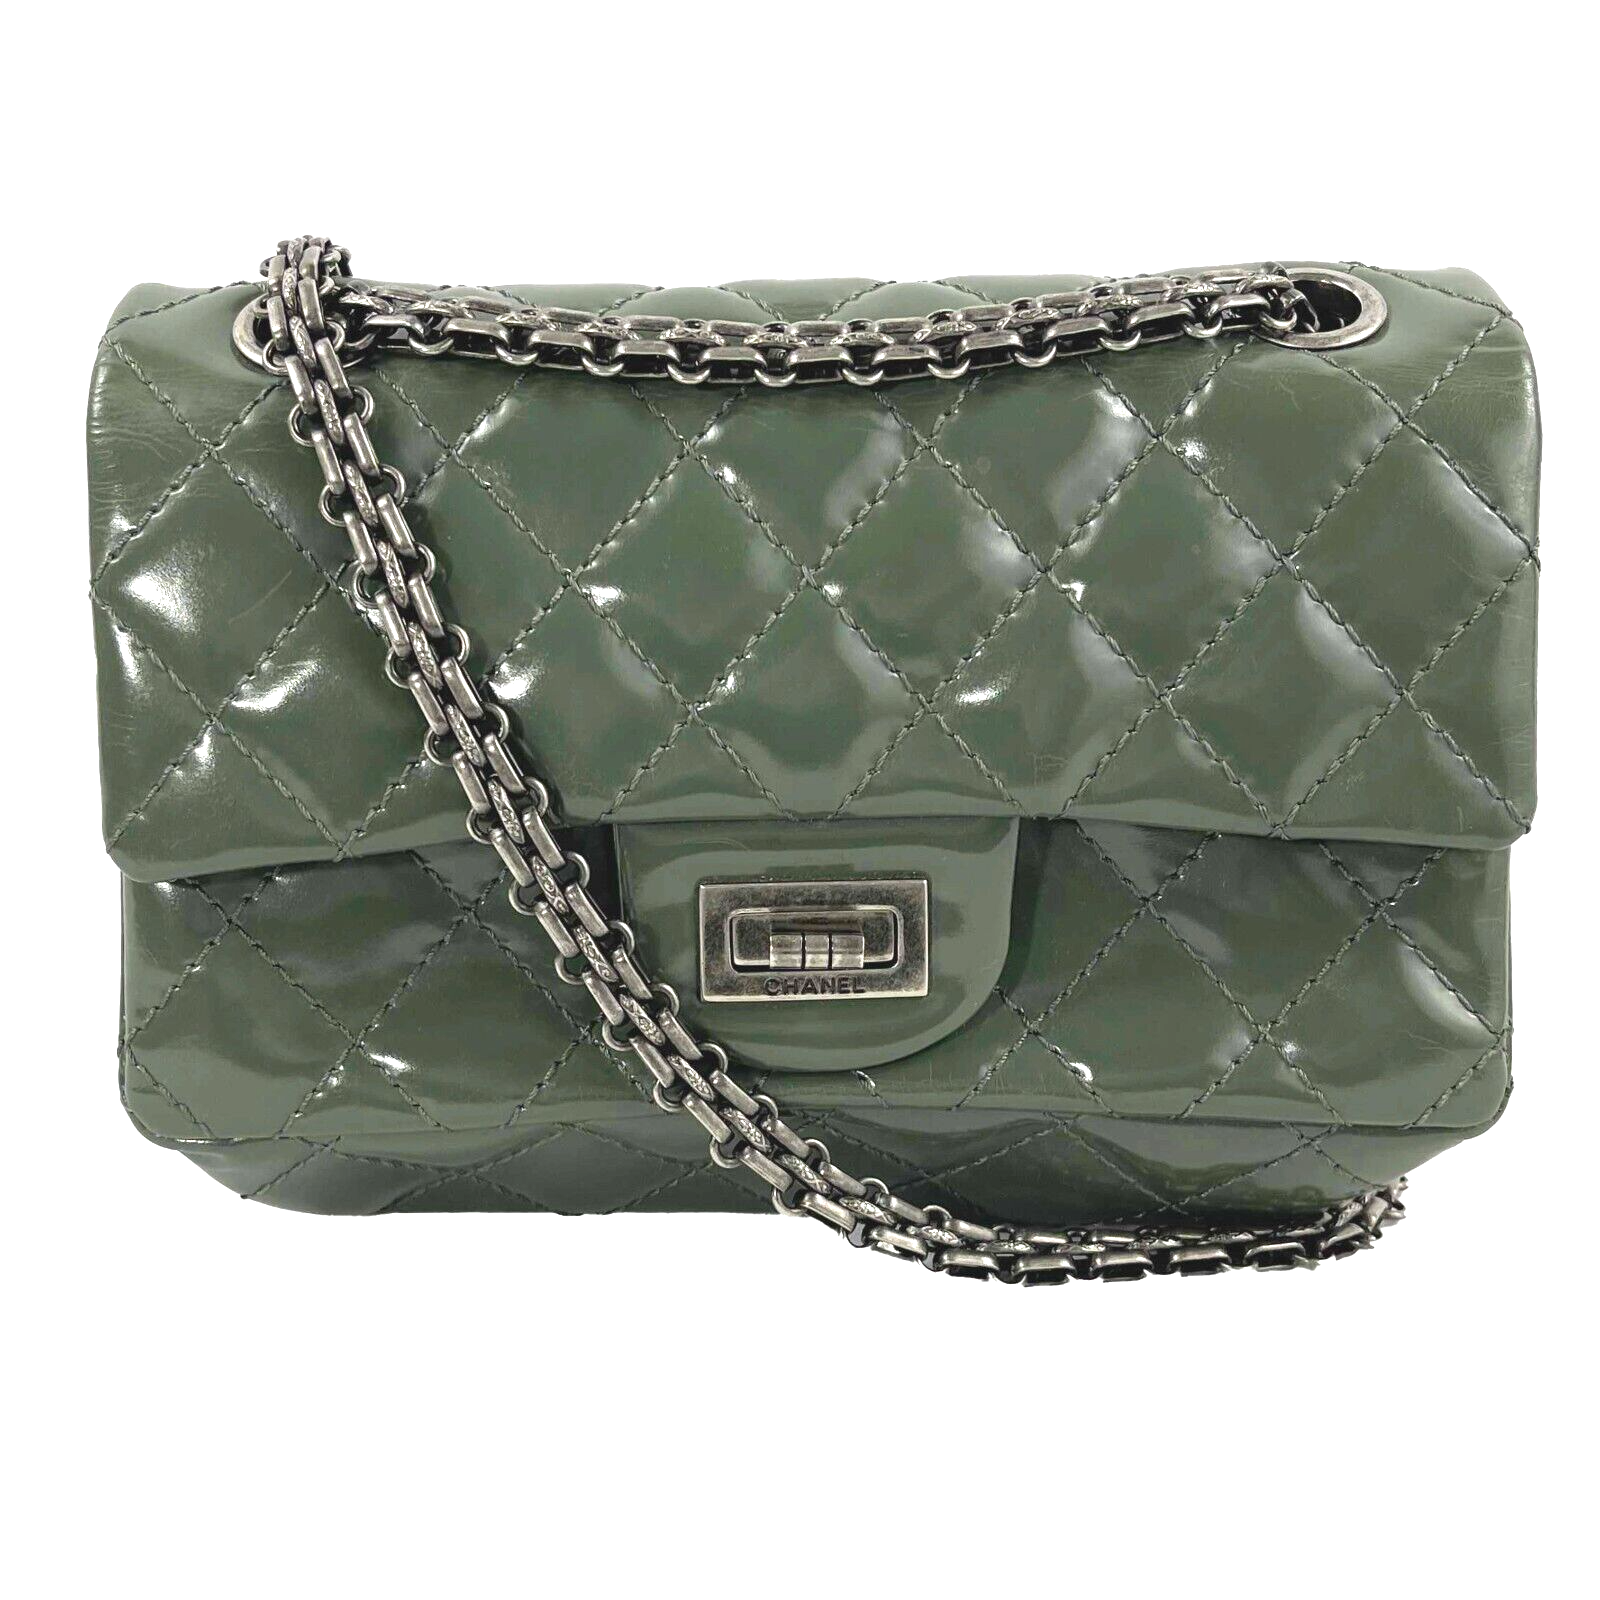 CHANEL Patent Quilted Small Accordion Reissue 2.55 Flap - Olive Green  Crossbody